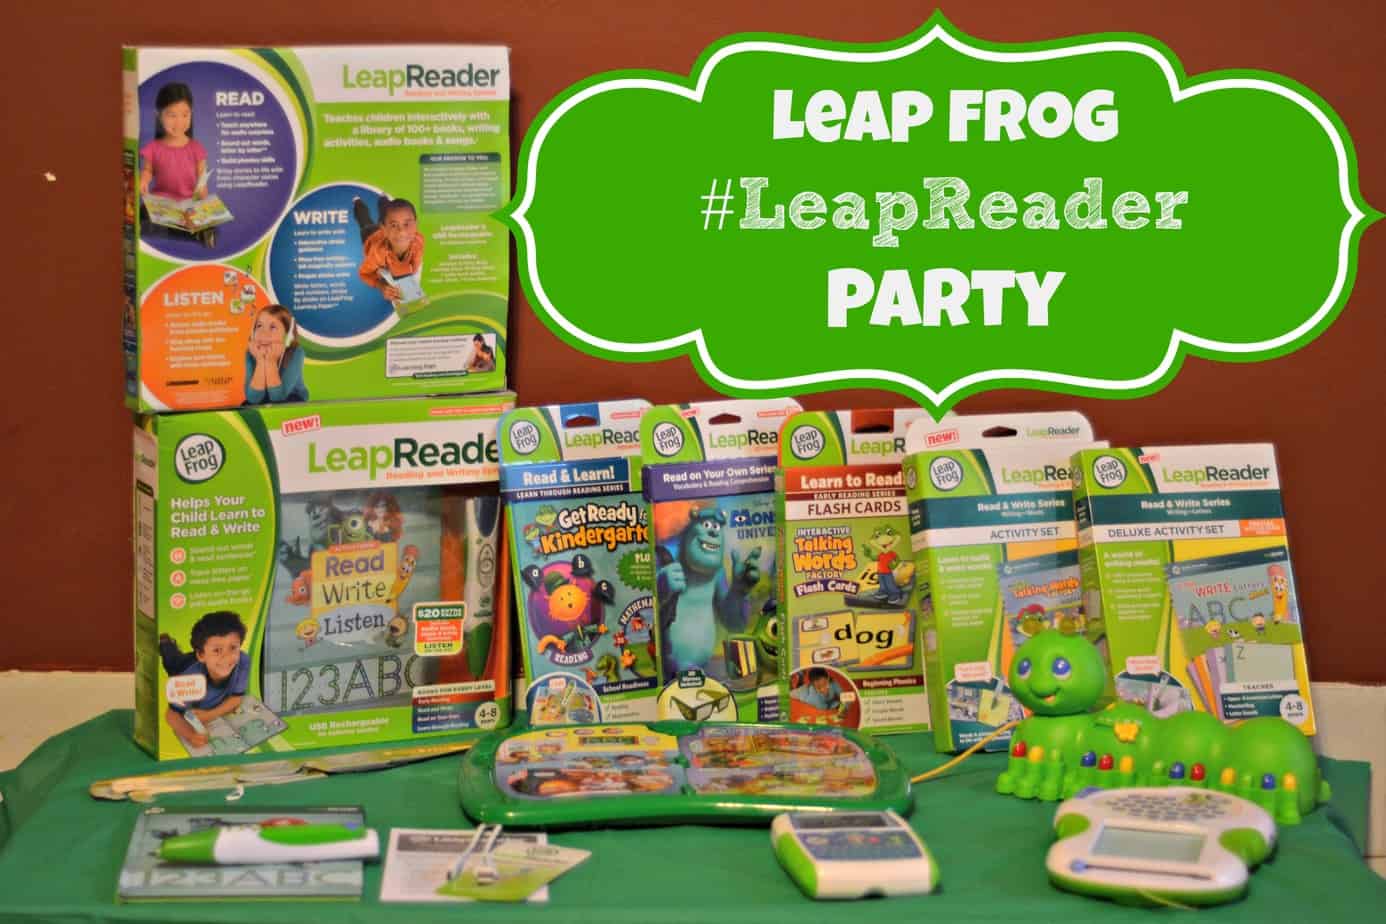 LEAPFROG TAG or LEAPREADER BOOKS $4.79 when you buy 4 or more Books